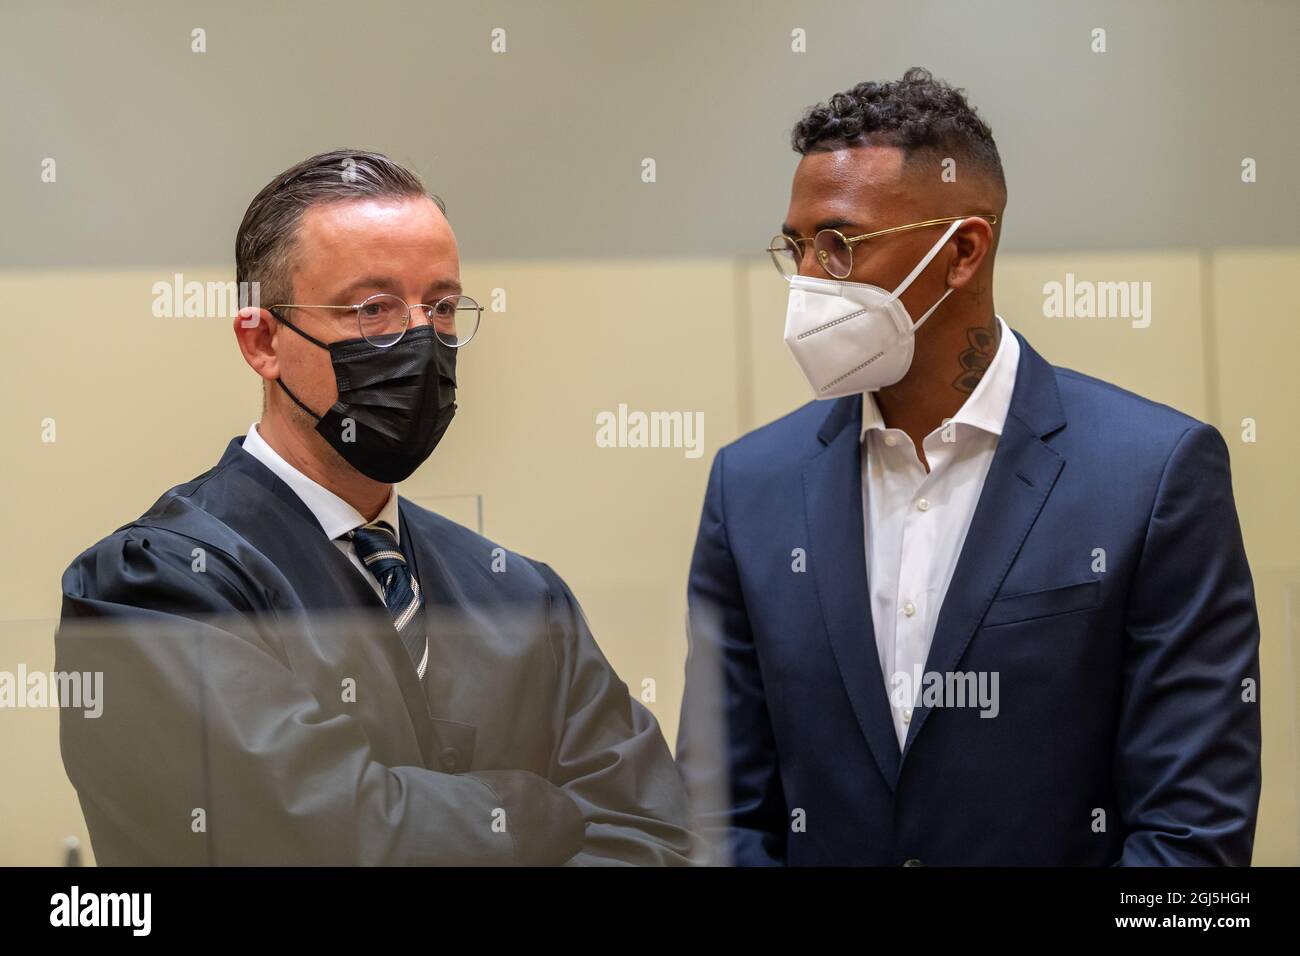 Munich, Germany. 09th Sep, 2021. Professional footballer and former national player Jerome Boateng (r) stands with his lawyer Kai Walden at the beginning of the trial against him at the Munich District Court. Boateng is being tried on charges of assault. Credit: Peter Kneffel/dpa/Alamy Live News Stock Photo